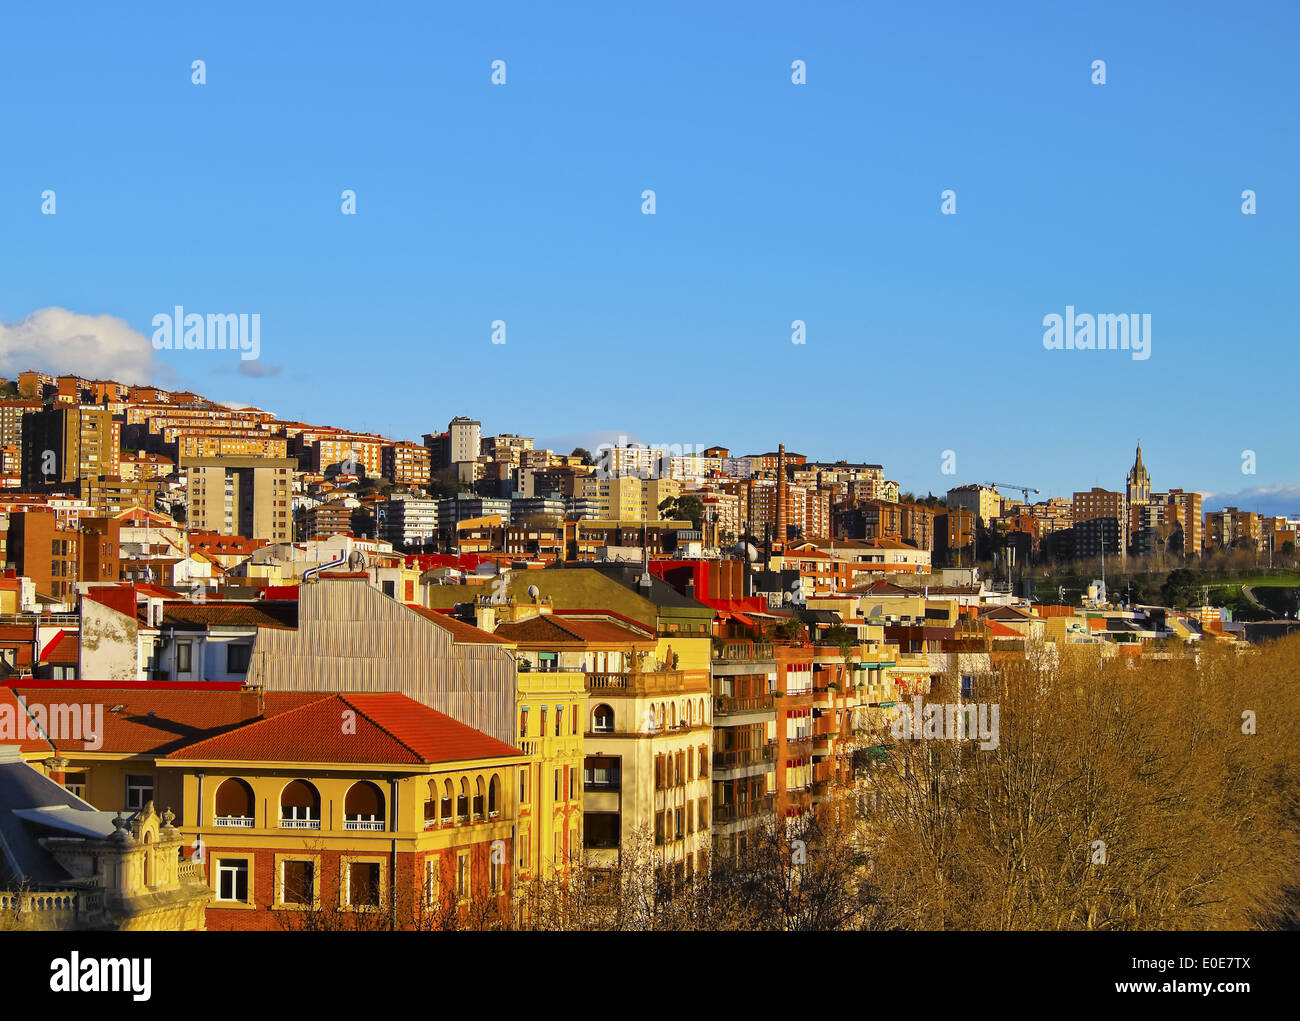 Skyline of Bilbao, Biscay, Basque Country, Spain Stock Photo